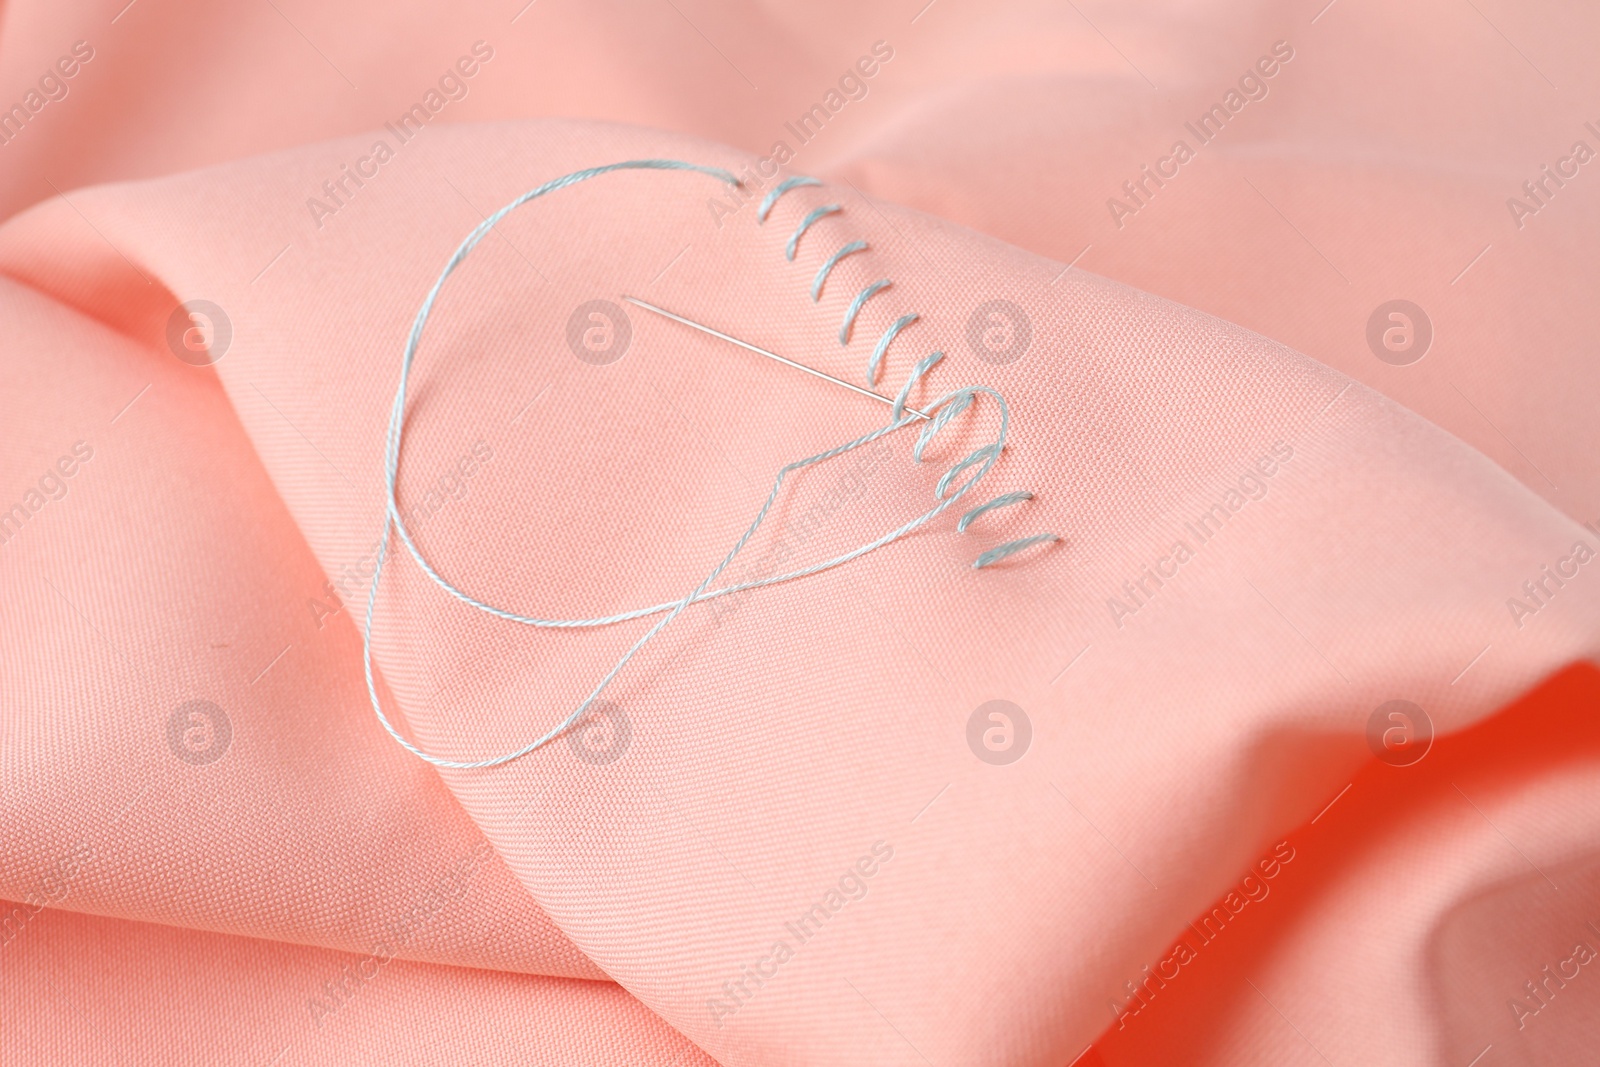 Photo of Sewing needle with thread and stitches on coral cloth, closeup